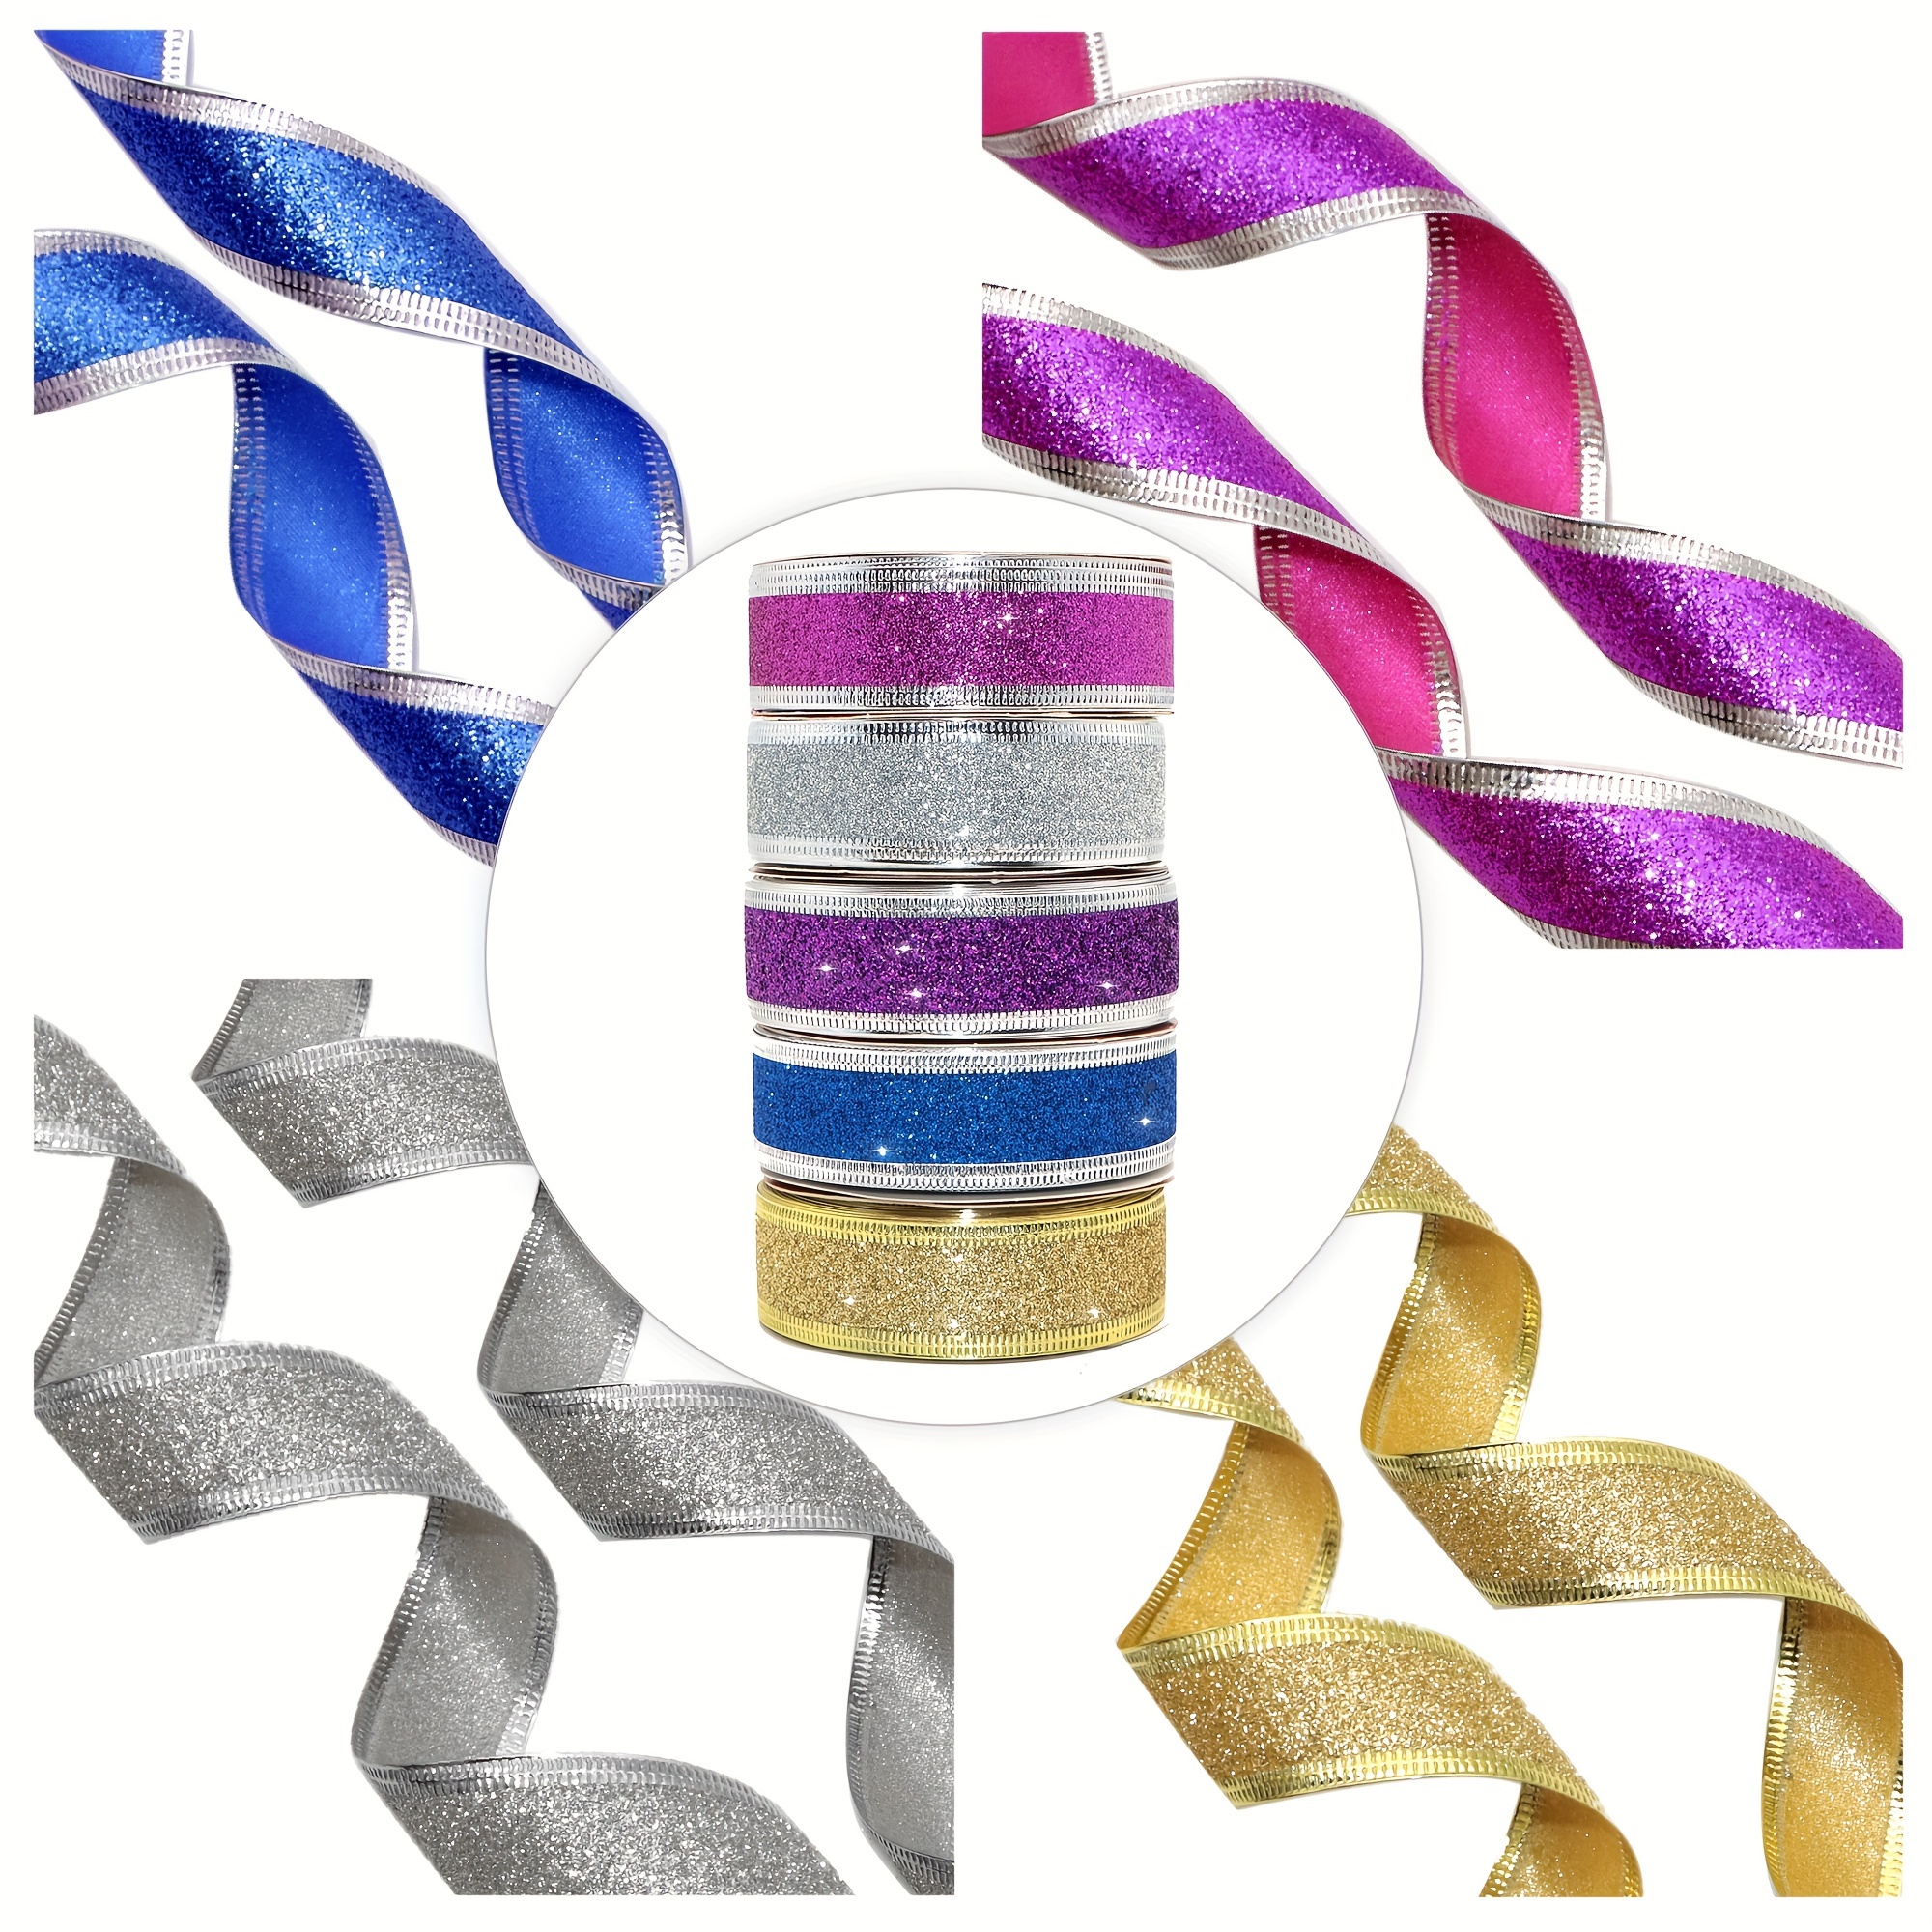  Glitter Ribbon Wired Christmas Ribbons Silver, Red